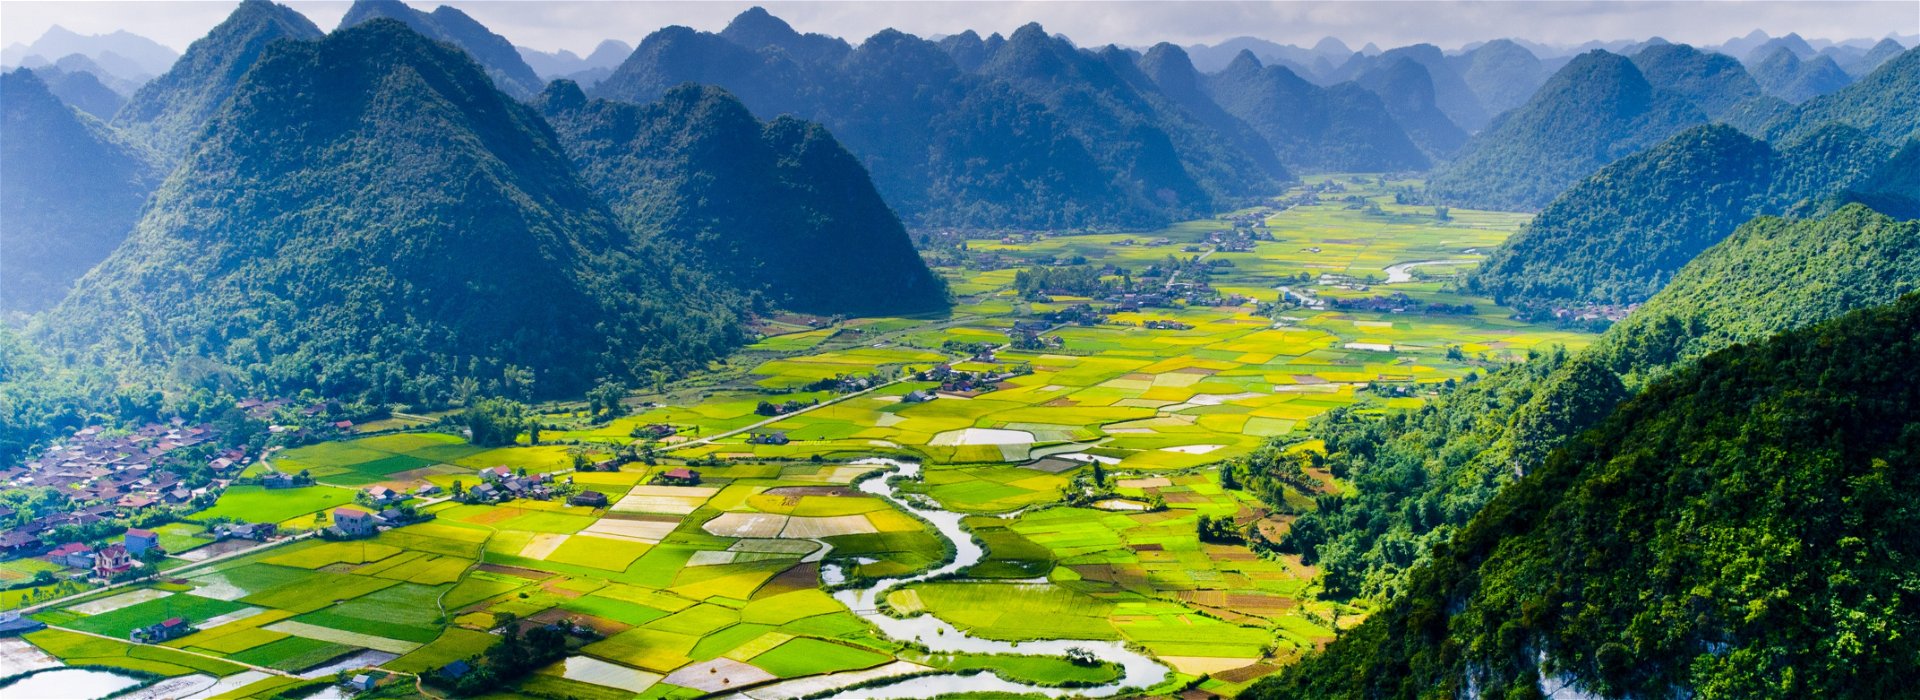 7 Best Places to Visit in South-East Asia 